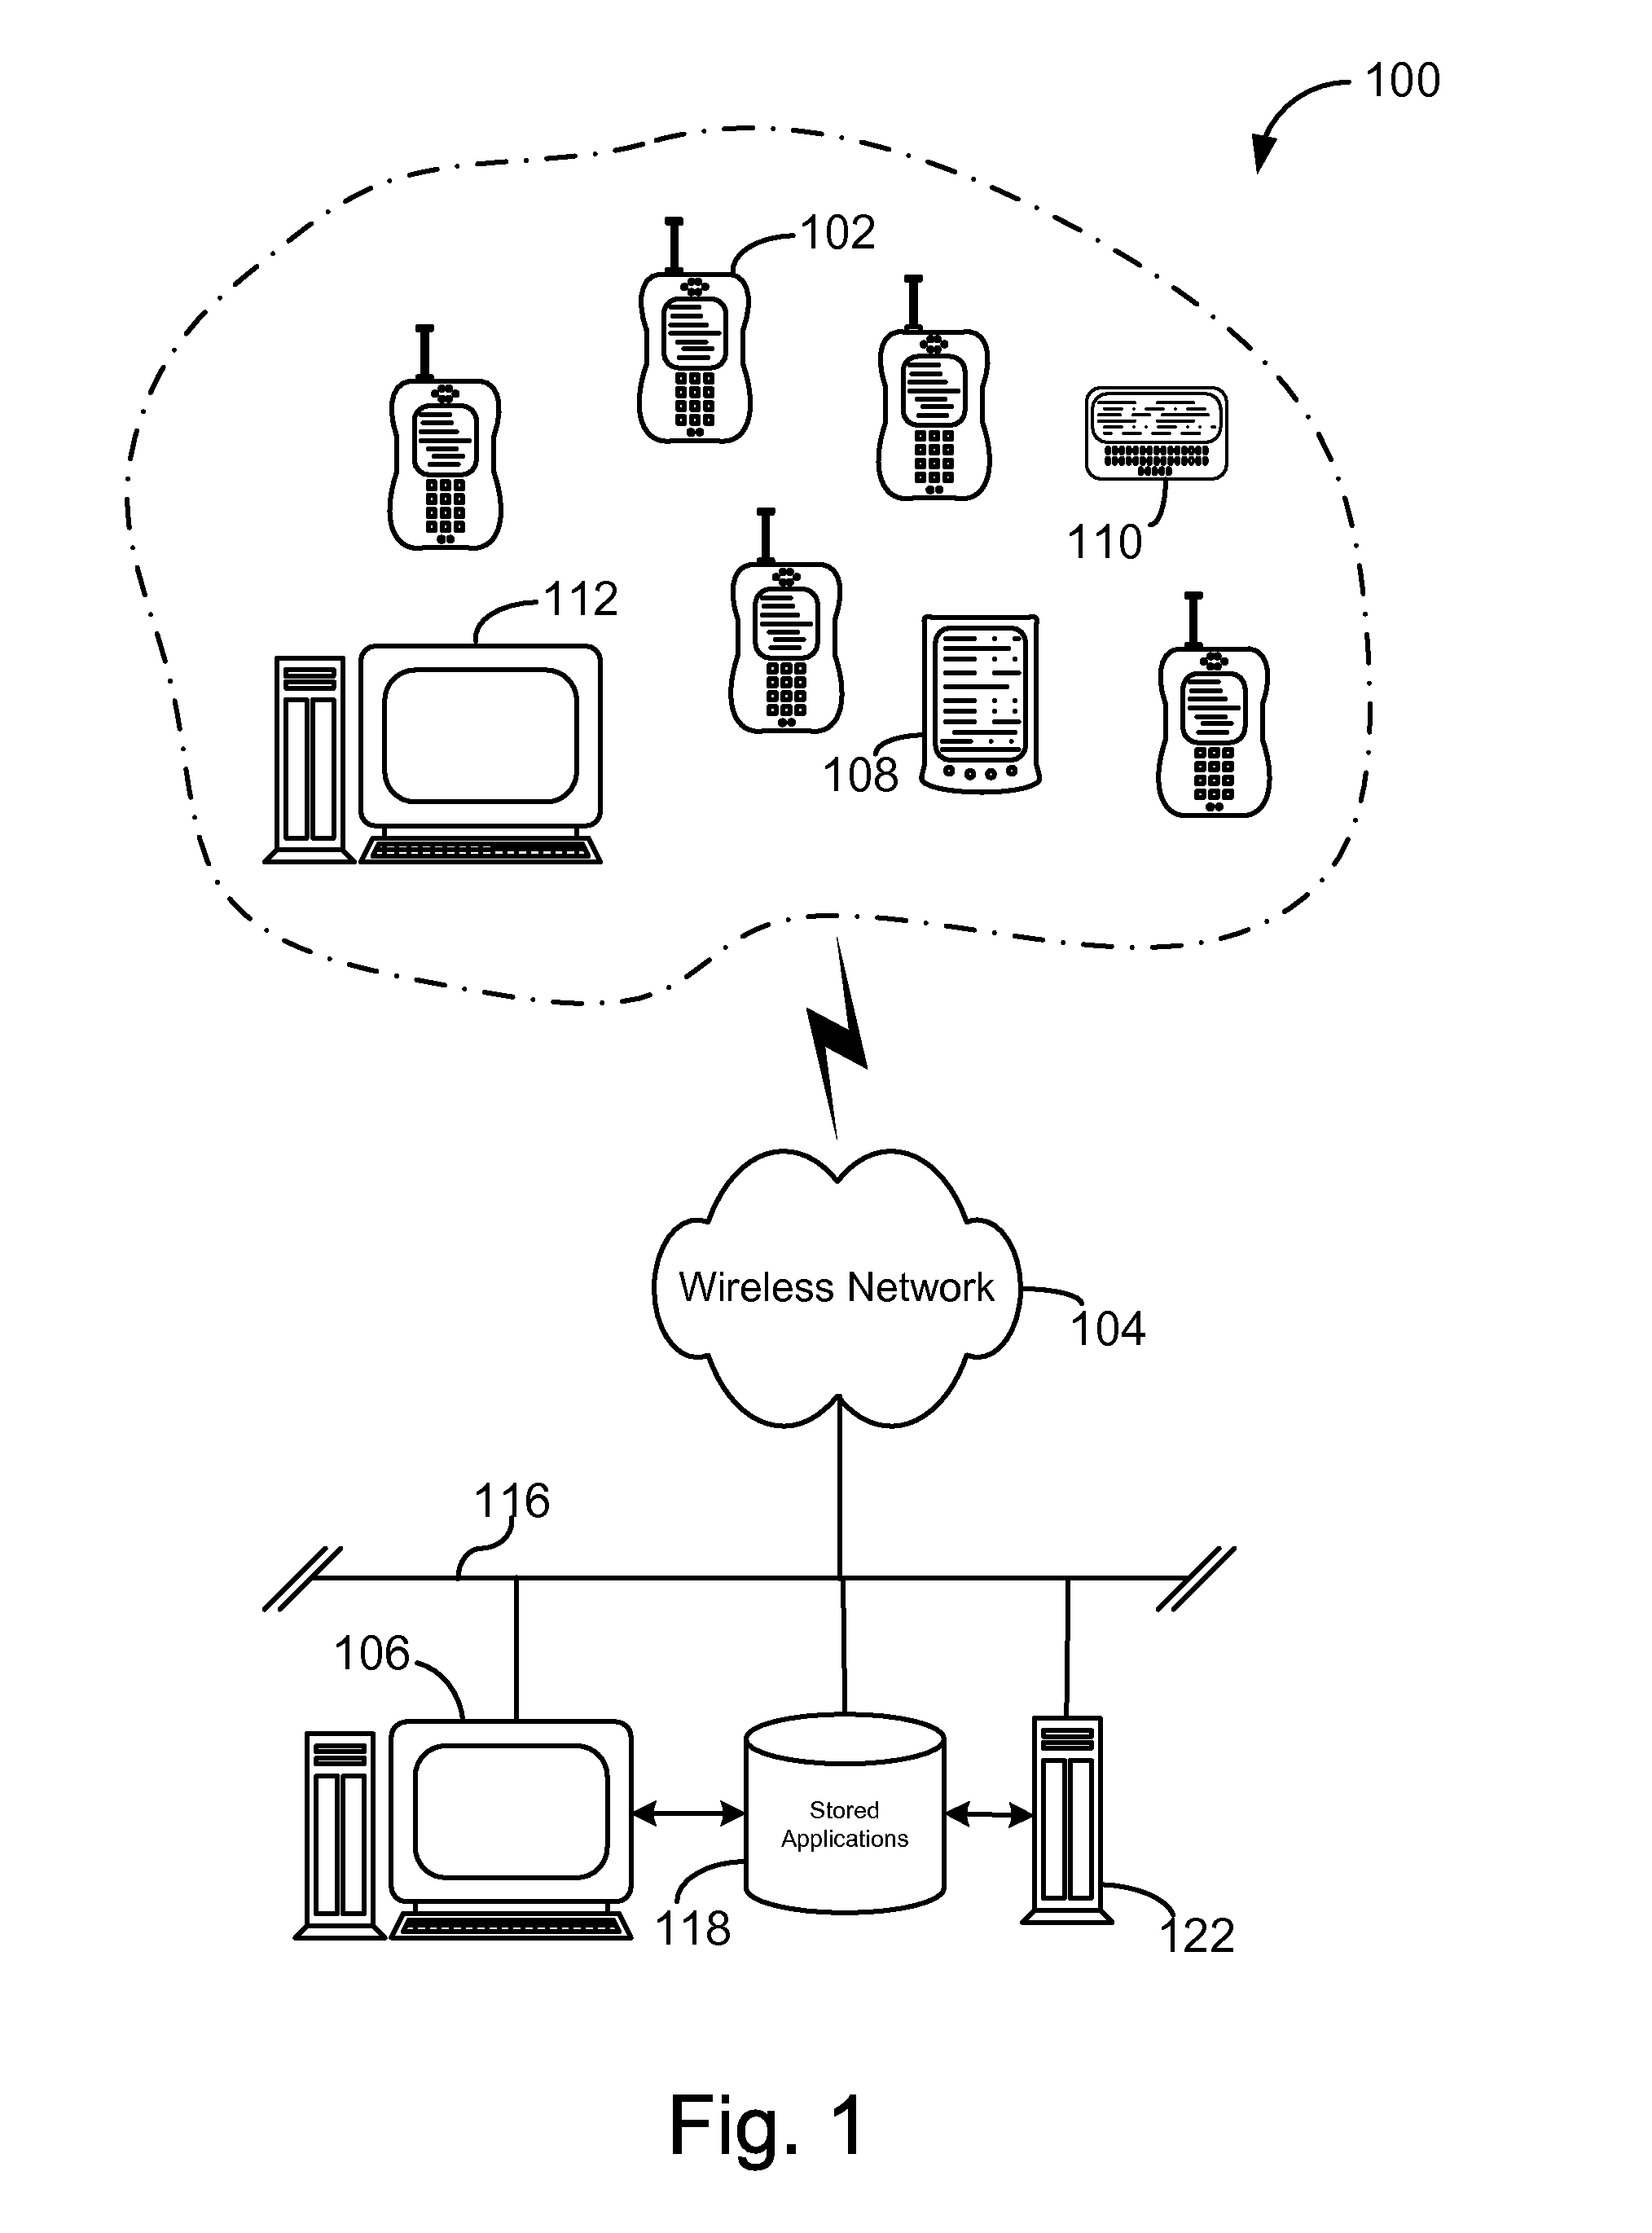 Server based technique for optimizing call setup latency for geographically dense groups